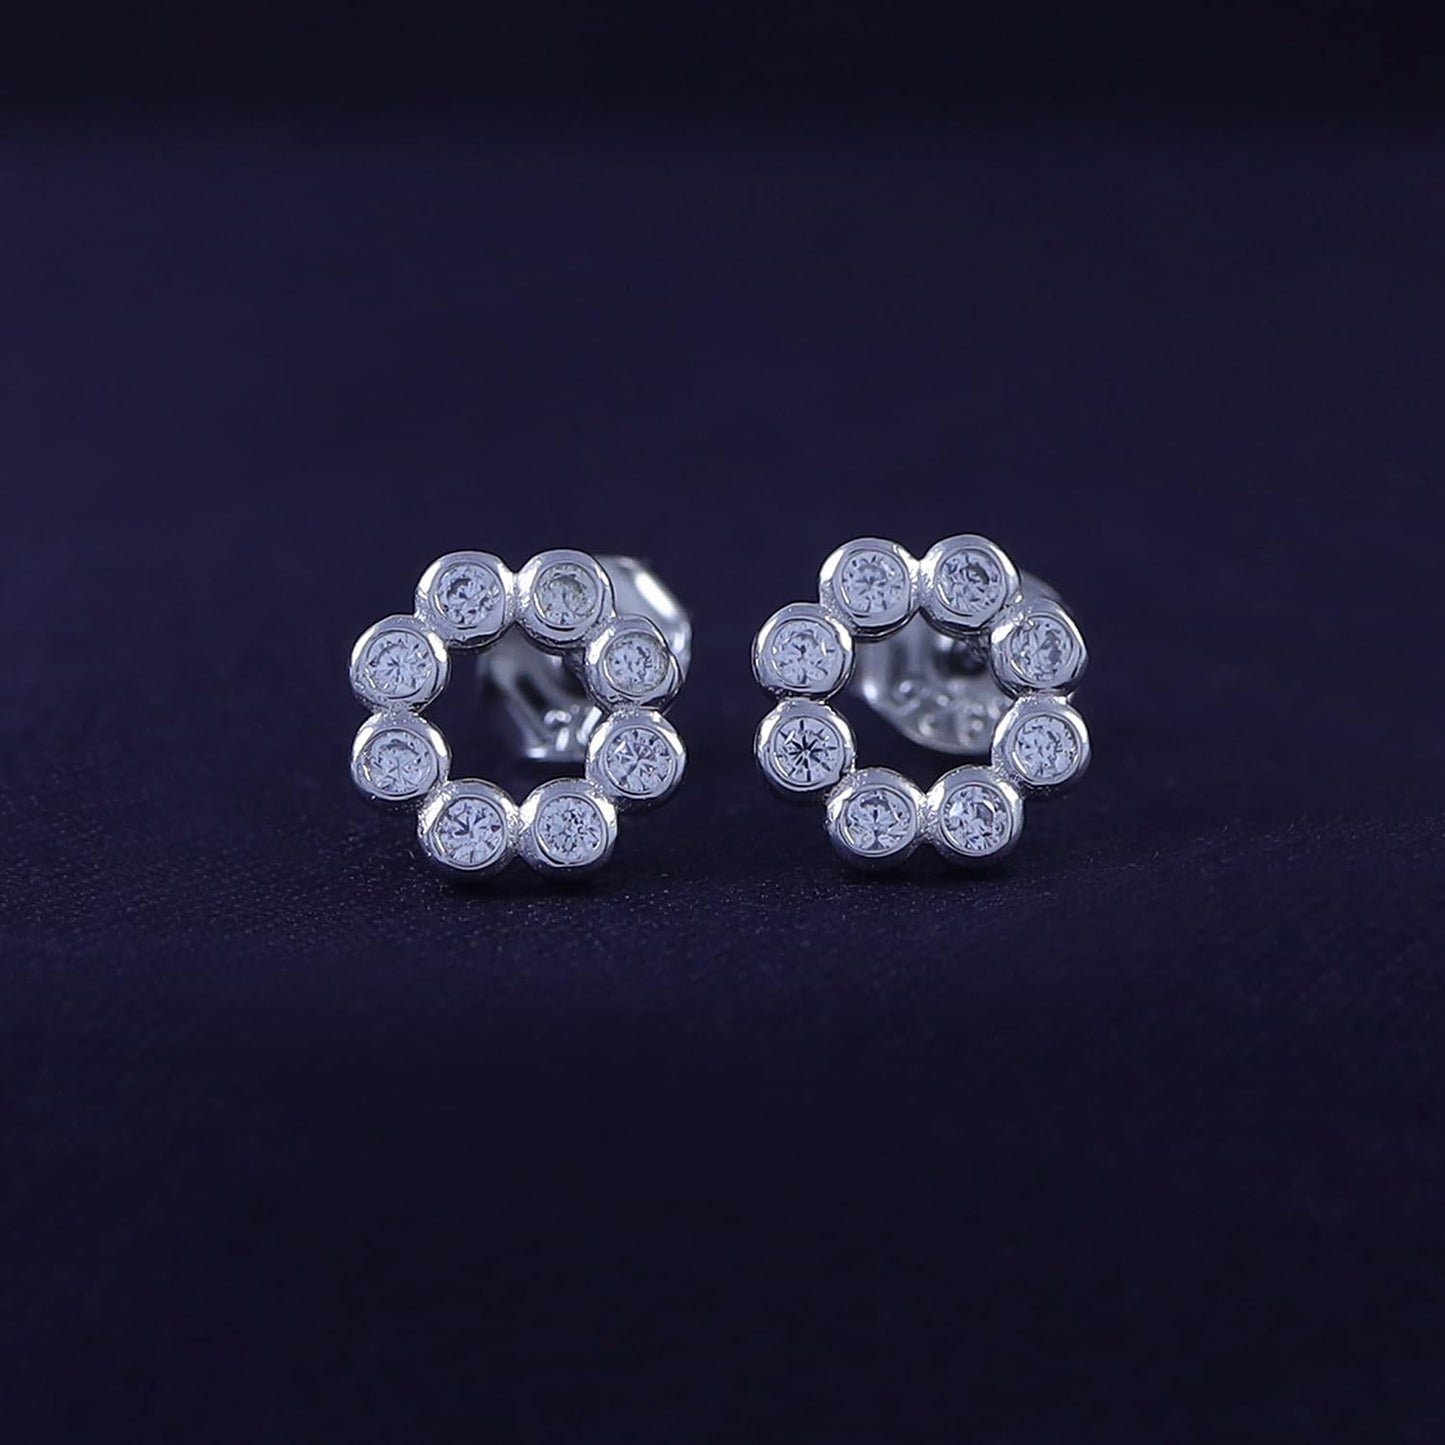 Round Sparkly White Cubic Zirconia Bezel Set Open Circle Stud Earrings In 925 Sterling Silver